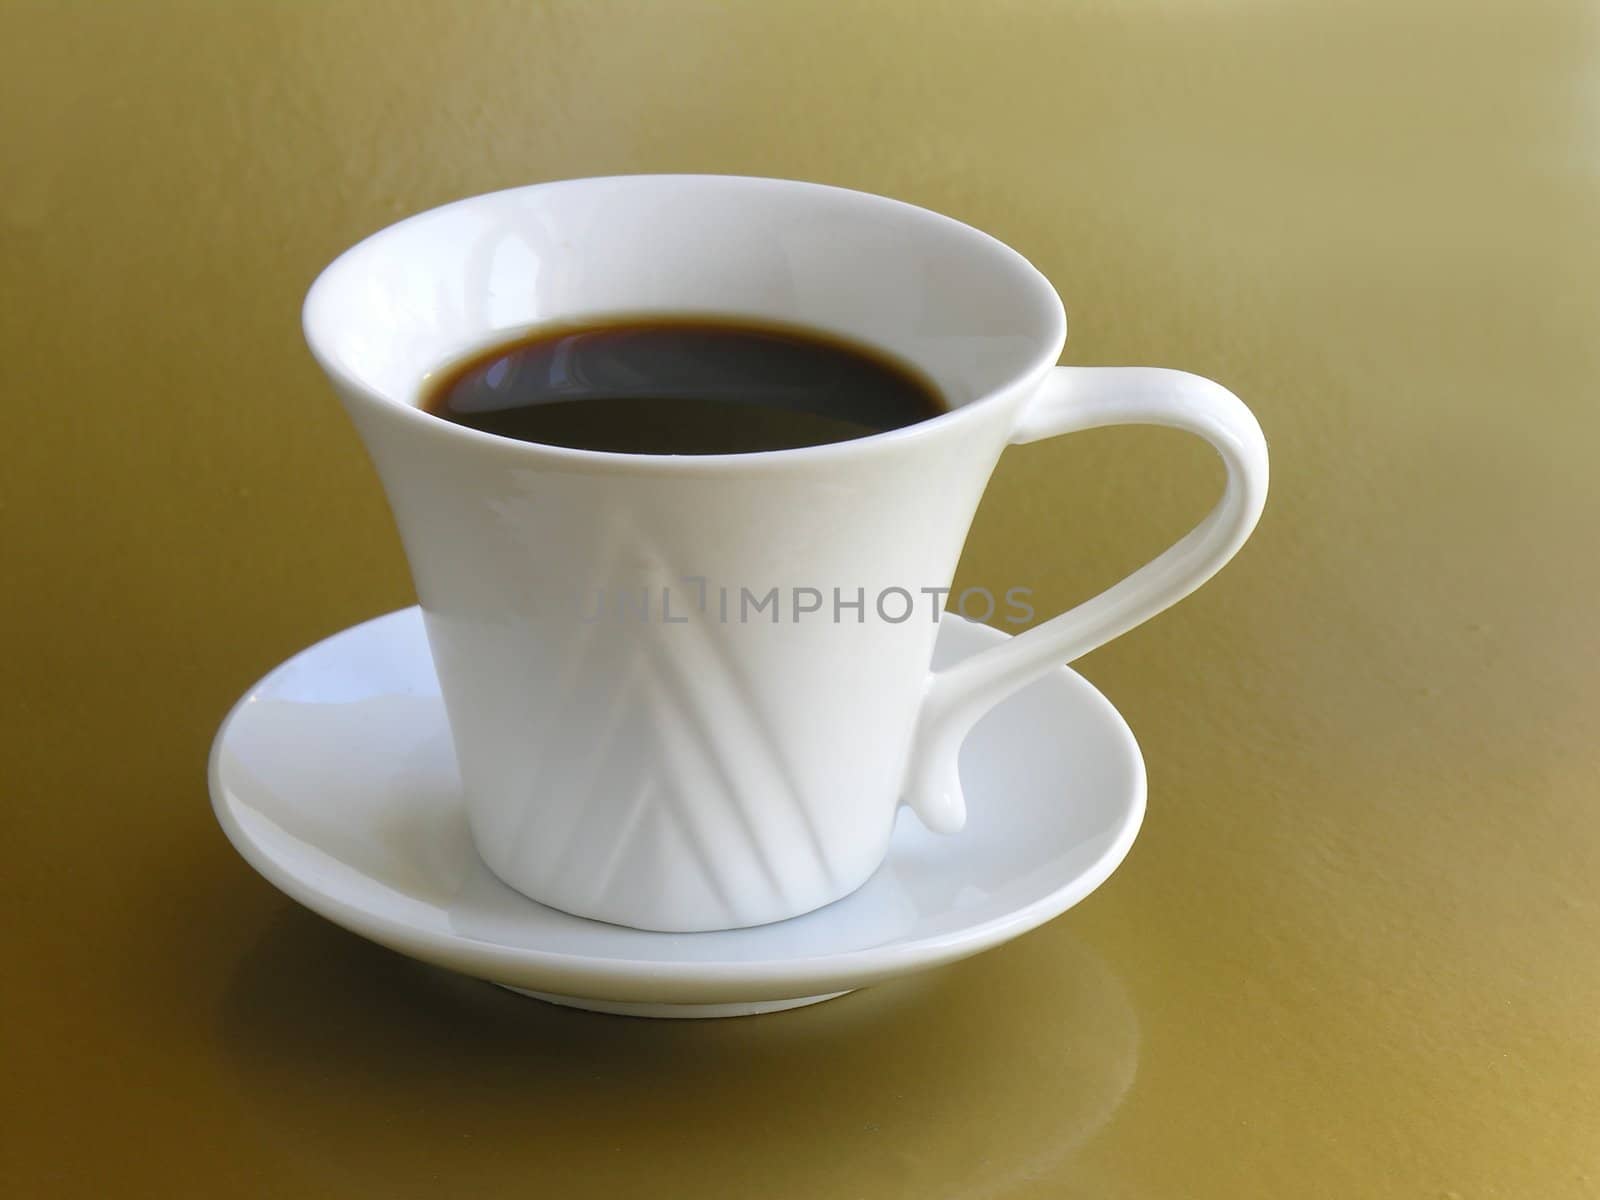 black strong coffee in small cup